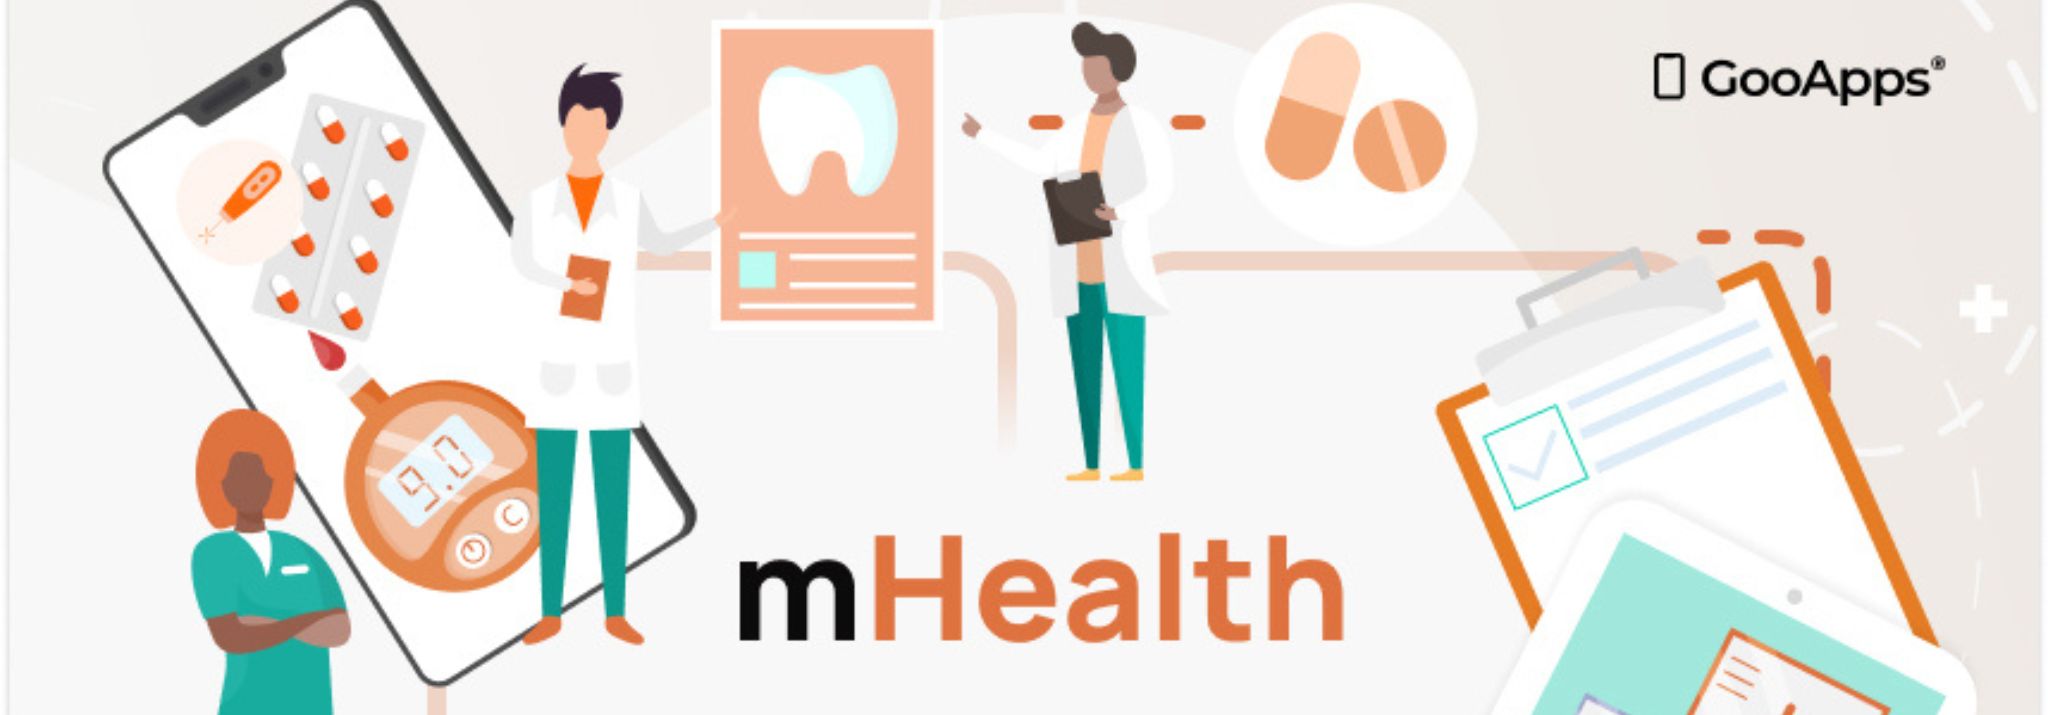 mHealth: Everything you need to know about mobile health